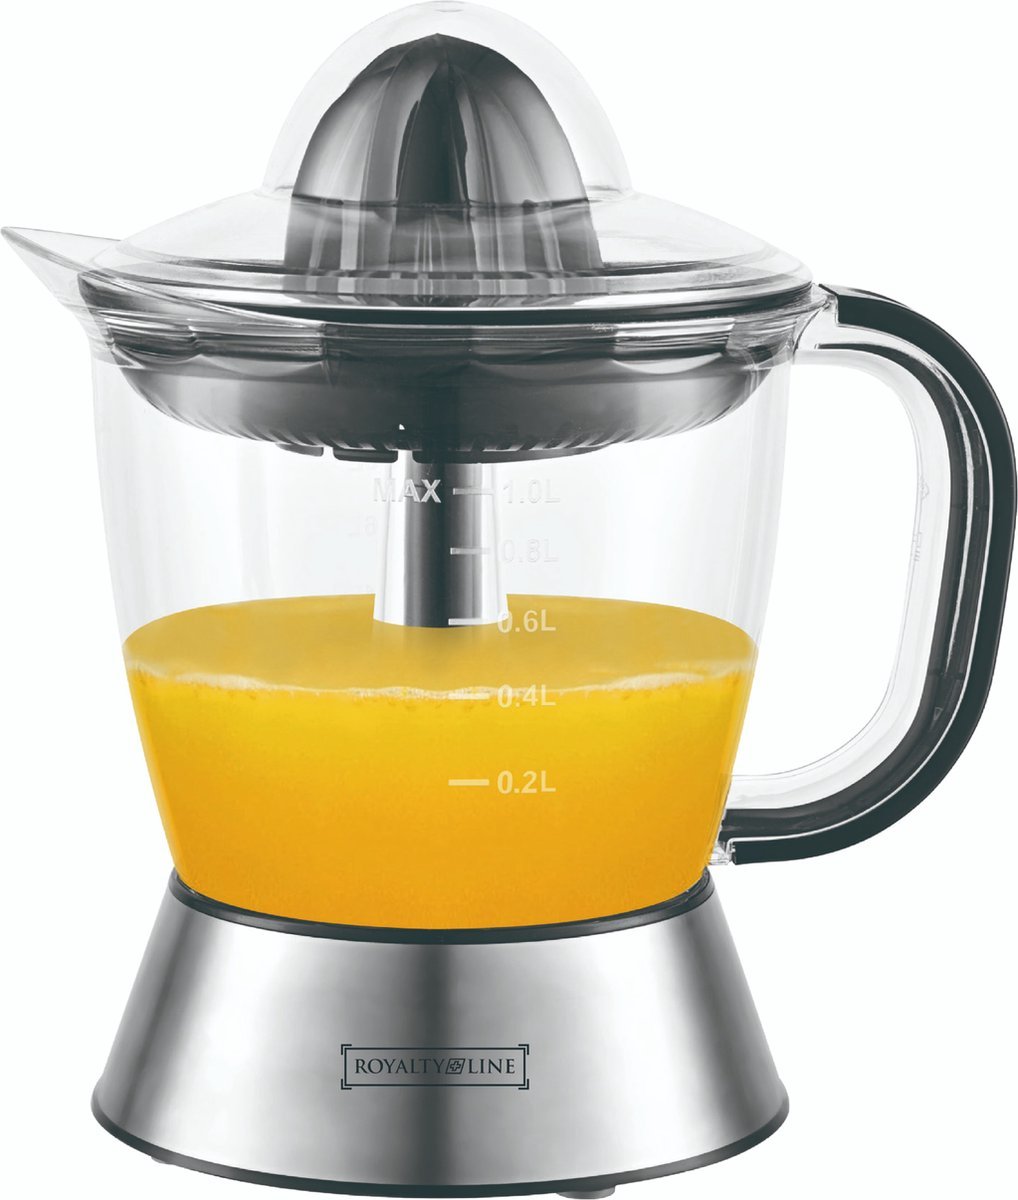 Electric Juicer - 1 Liter - Powerful and Fast - Stainless Steel - Royalty Line